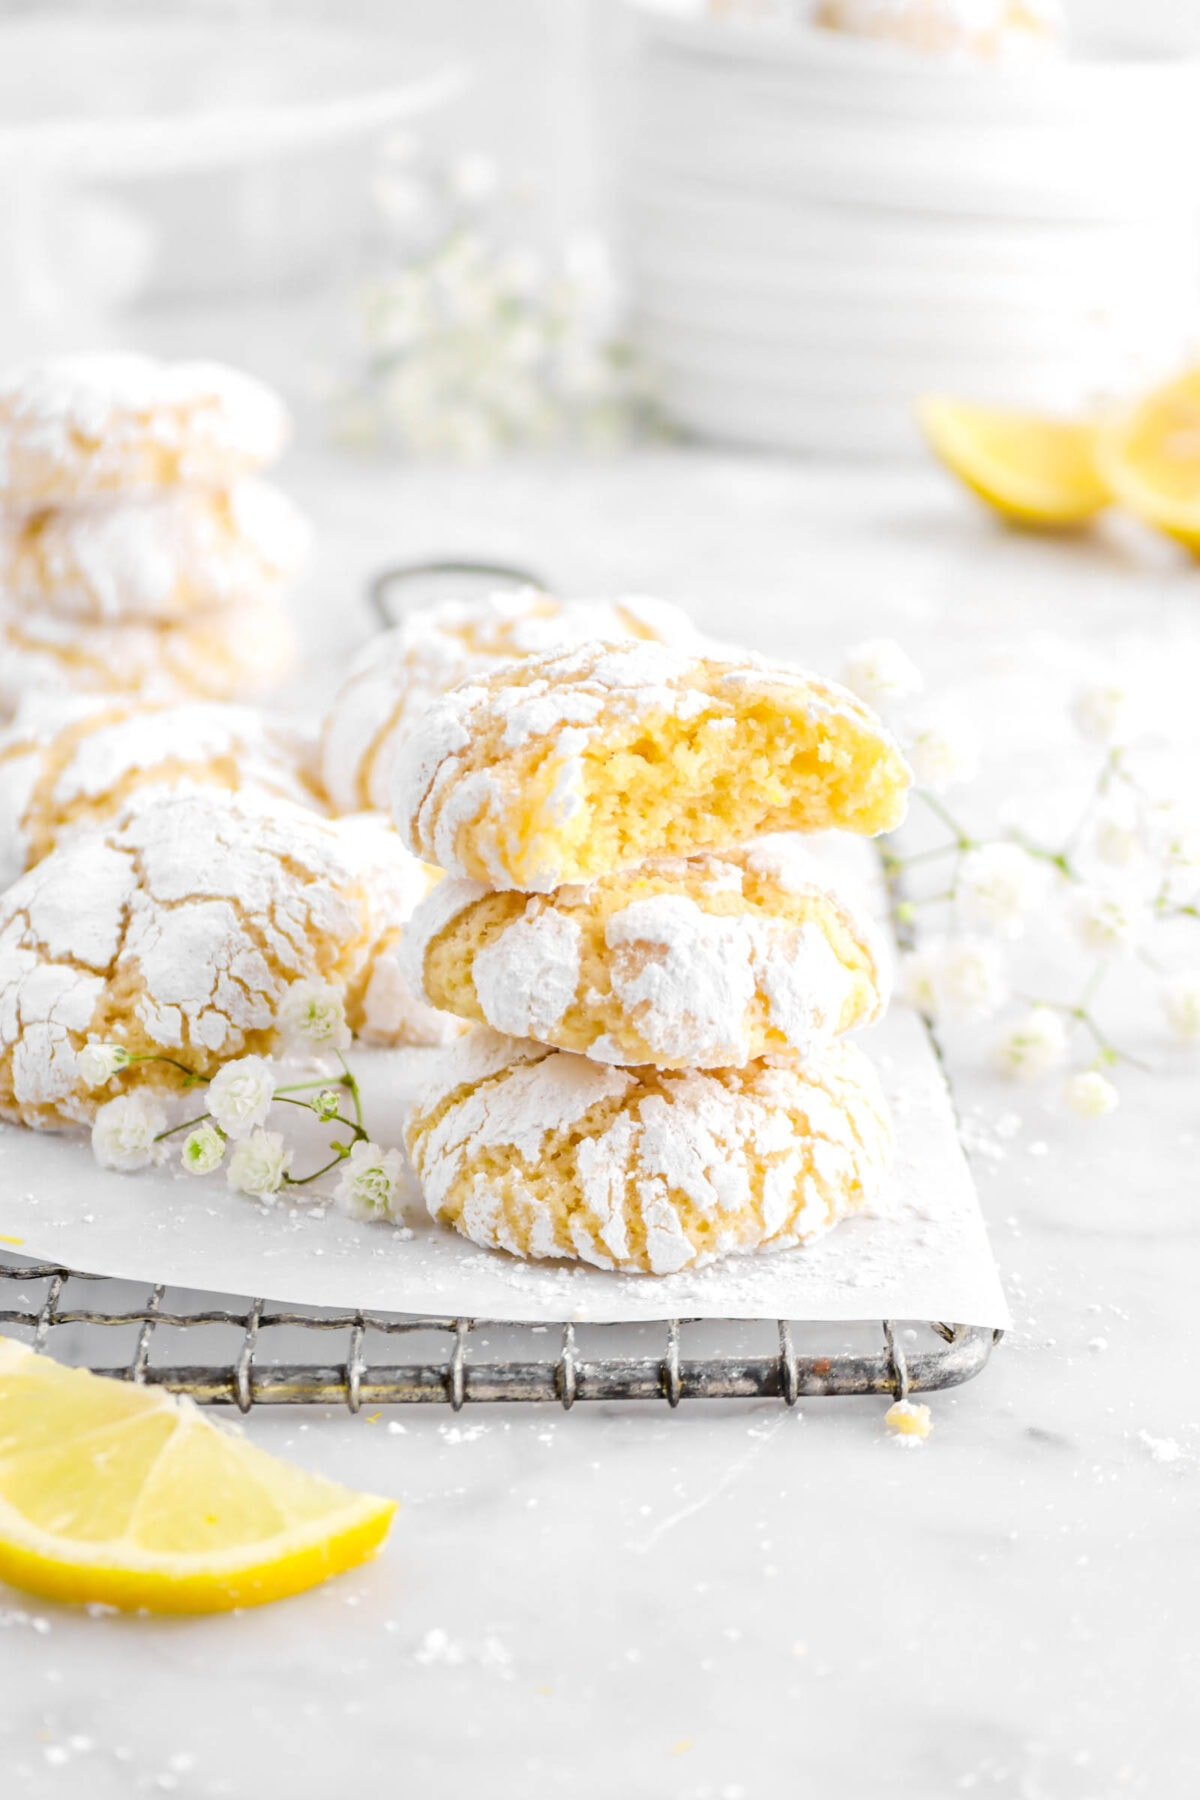 Soft & Chewy Lemon Crinkle Cookies | No Mixer Needed + Dairy-Free!